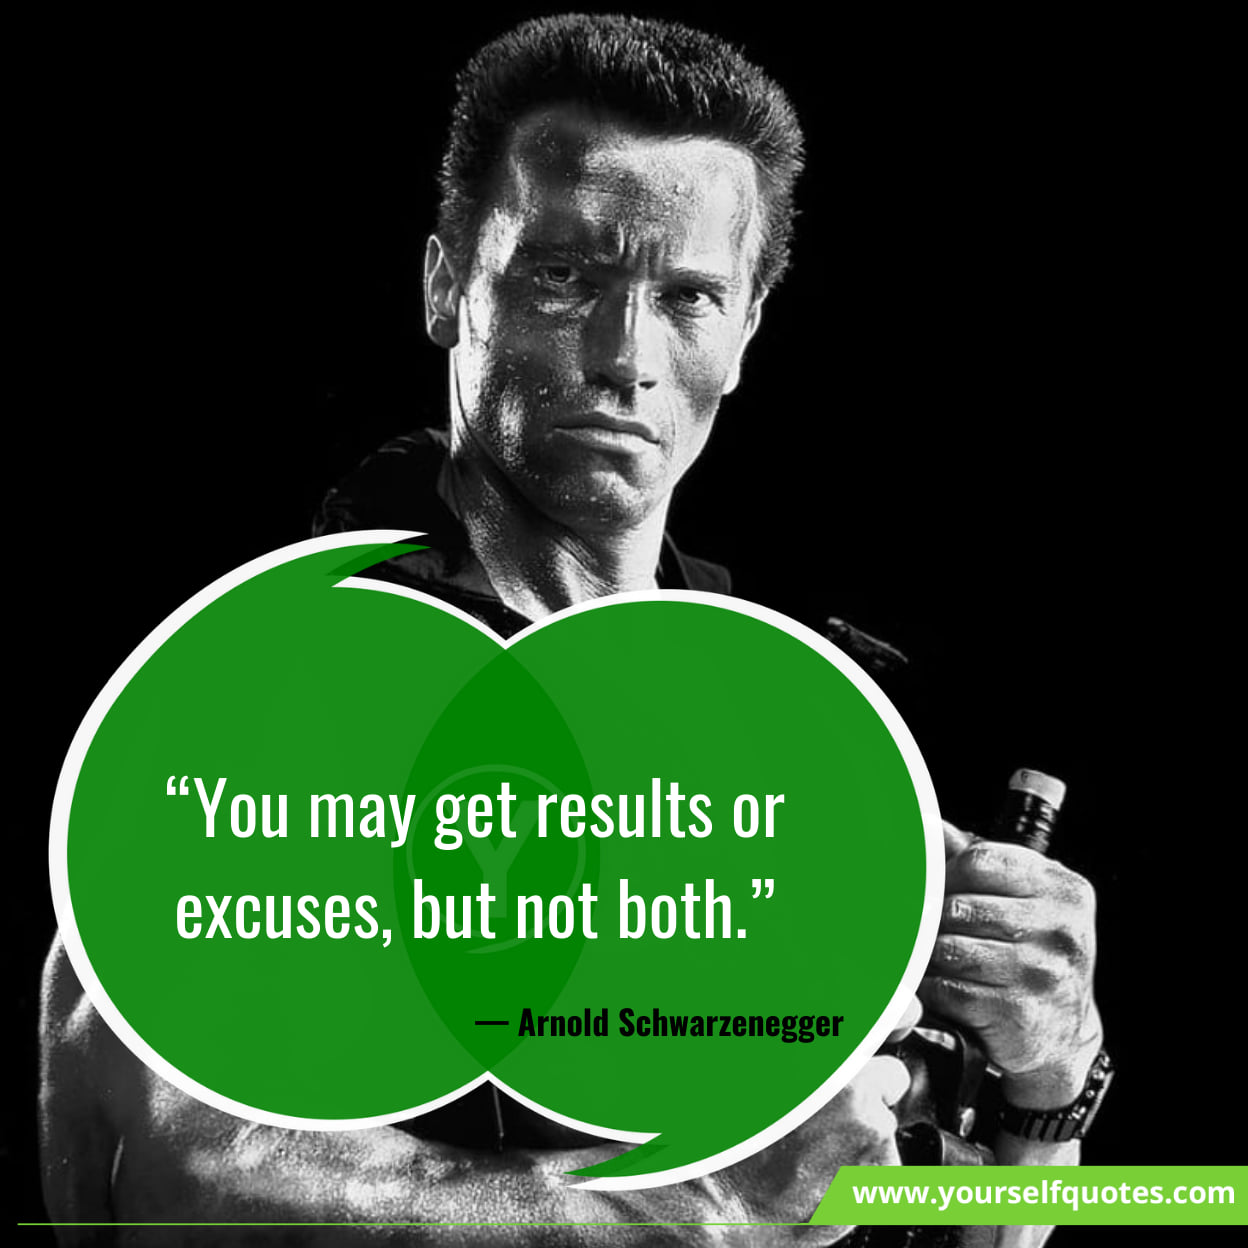 Best Famous Quotes On Fitness